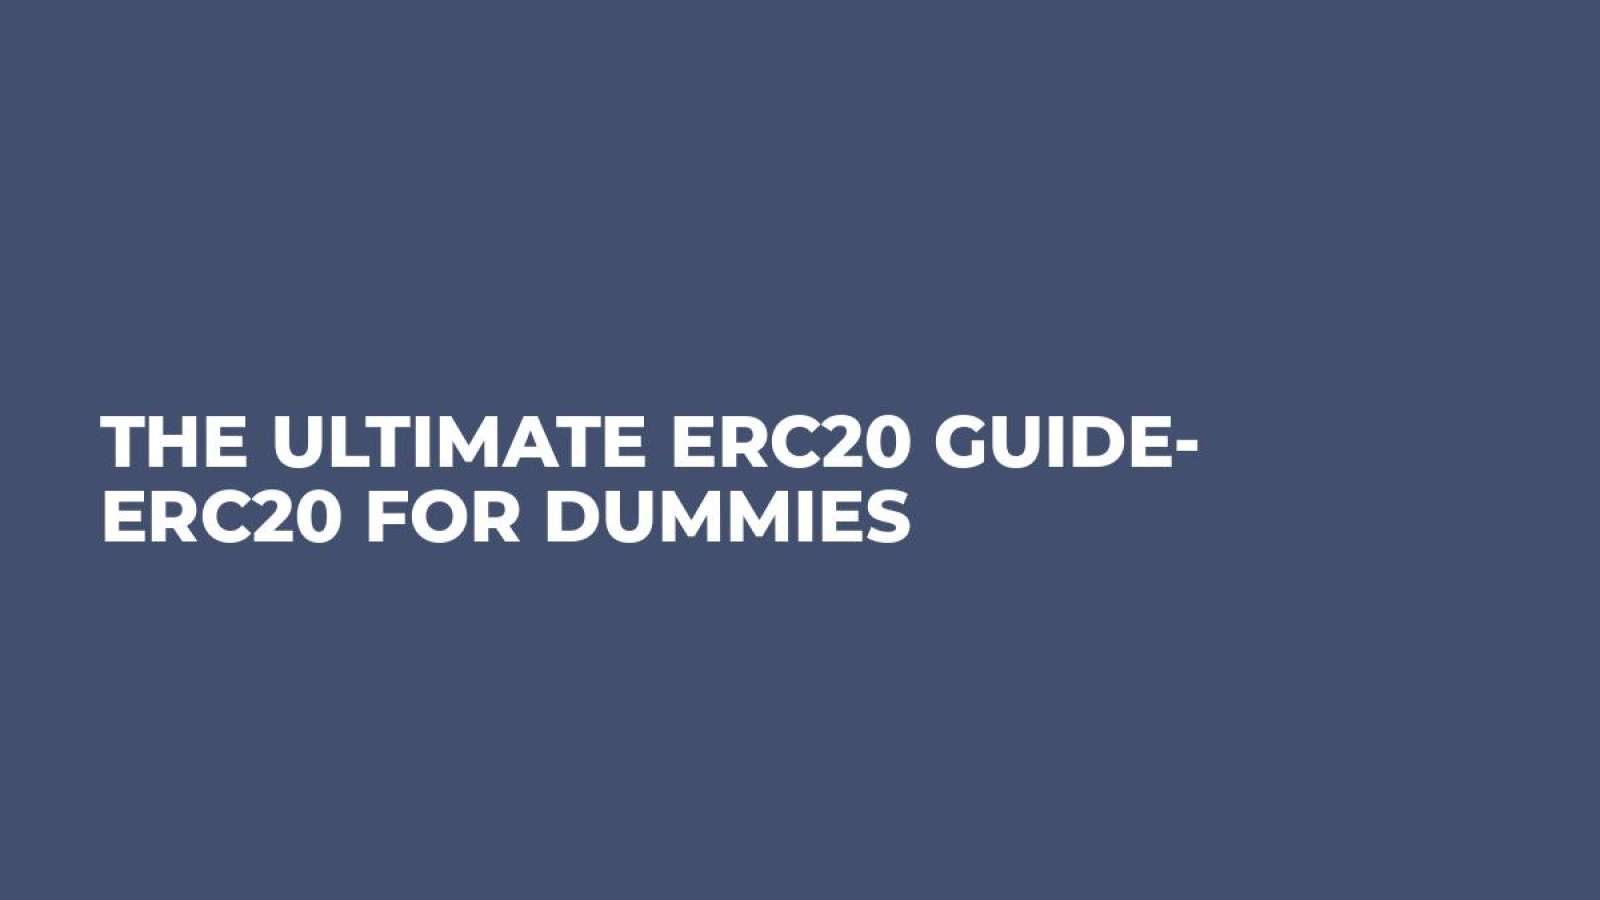 The Ultimate ERC20 Guide- ERC20 for Dummies